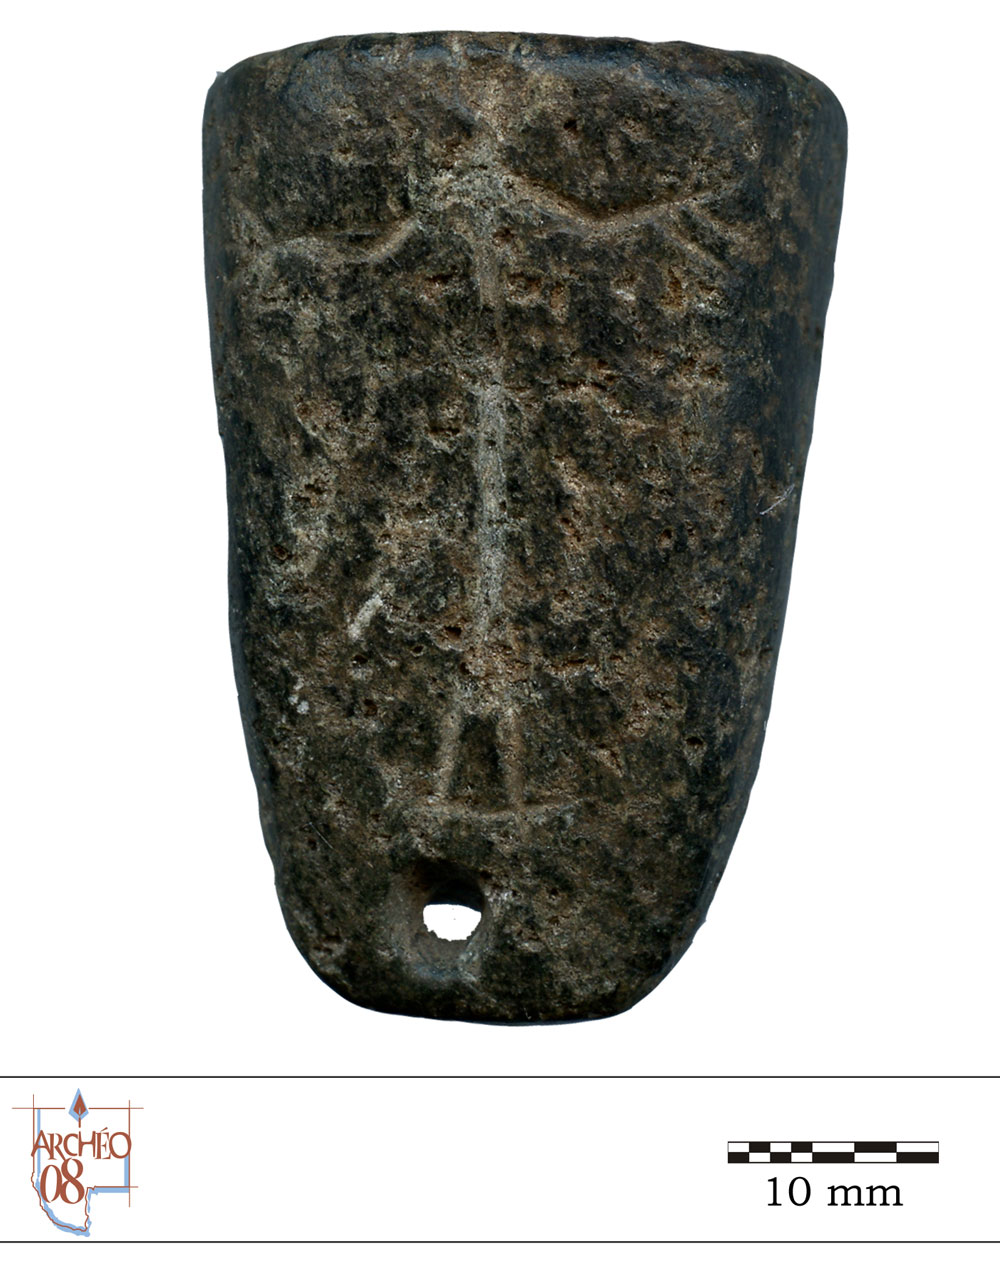 Picture of a stone pipe bowl. We can see the drawing of two anthropomorphic figures.